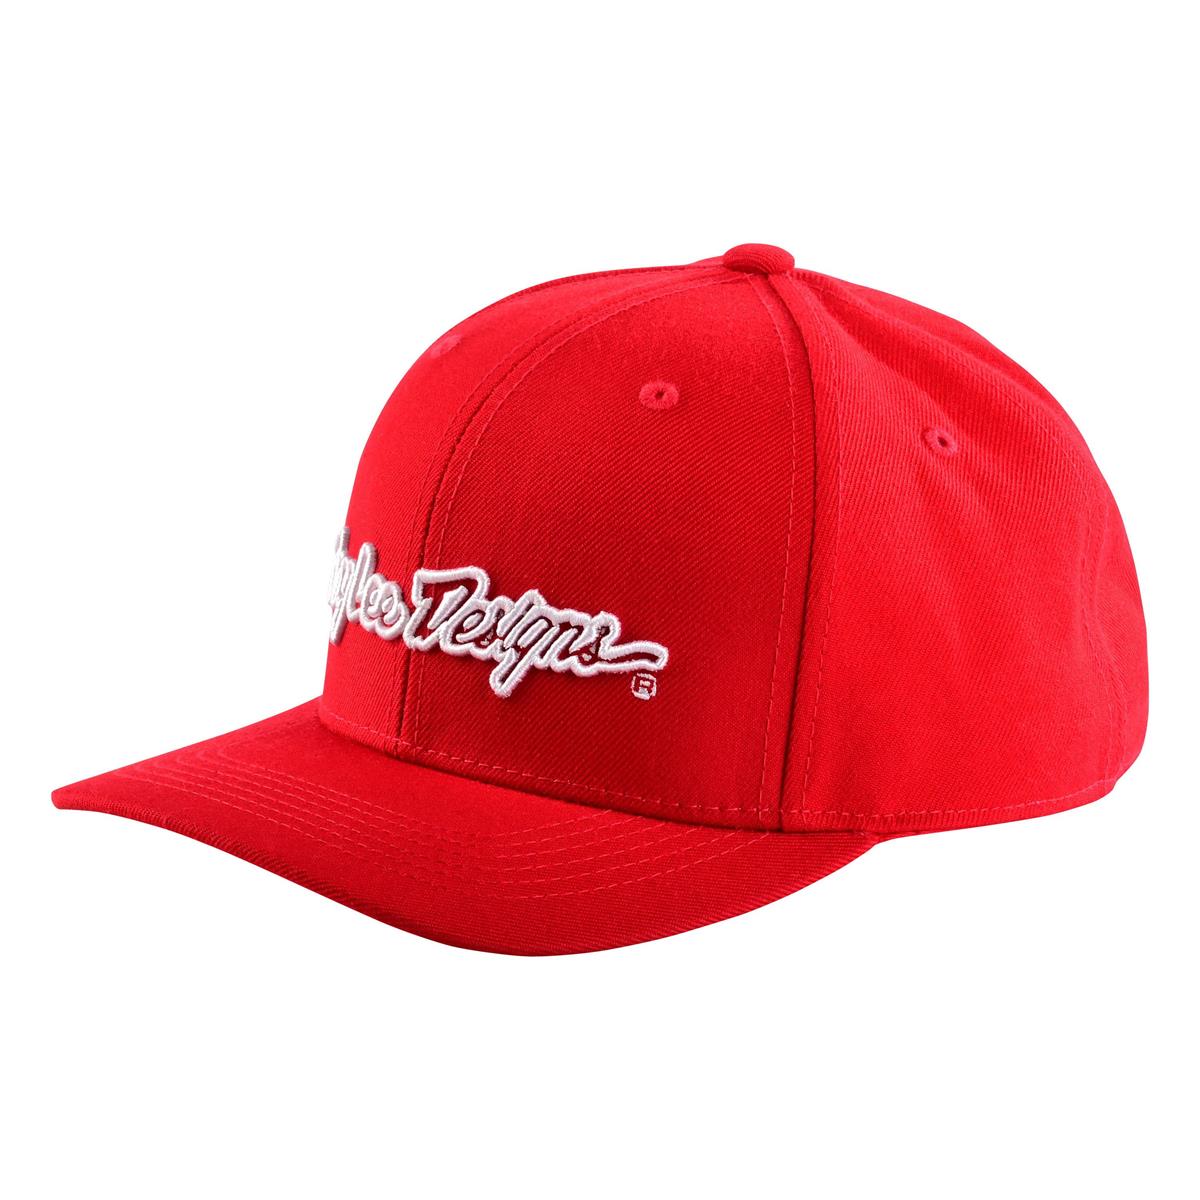 Troy Lee Designs 9Fifty Casquette Snap Back Signature Rouge/Blanc